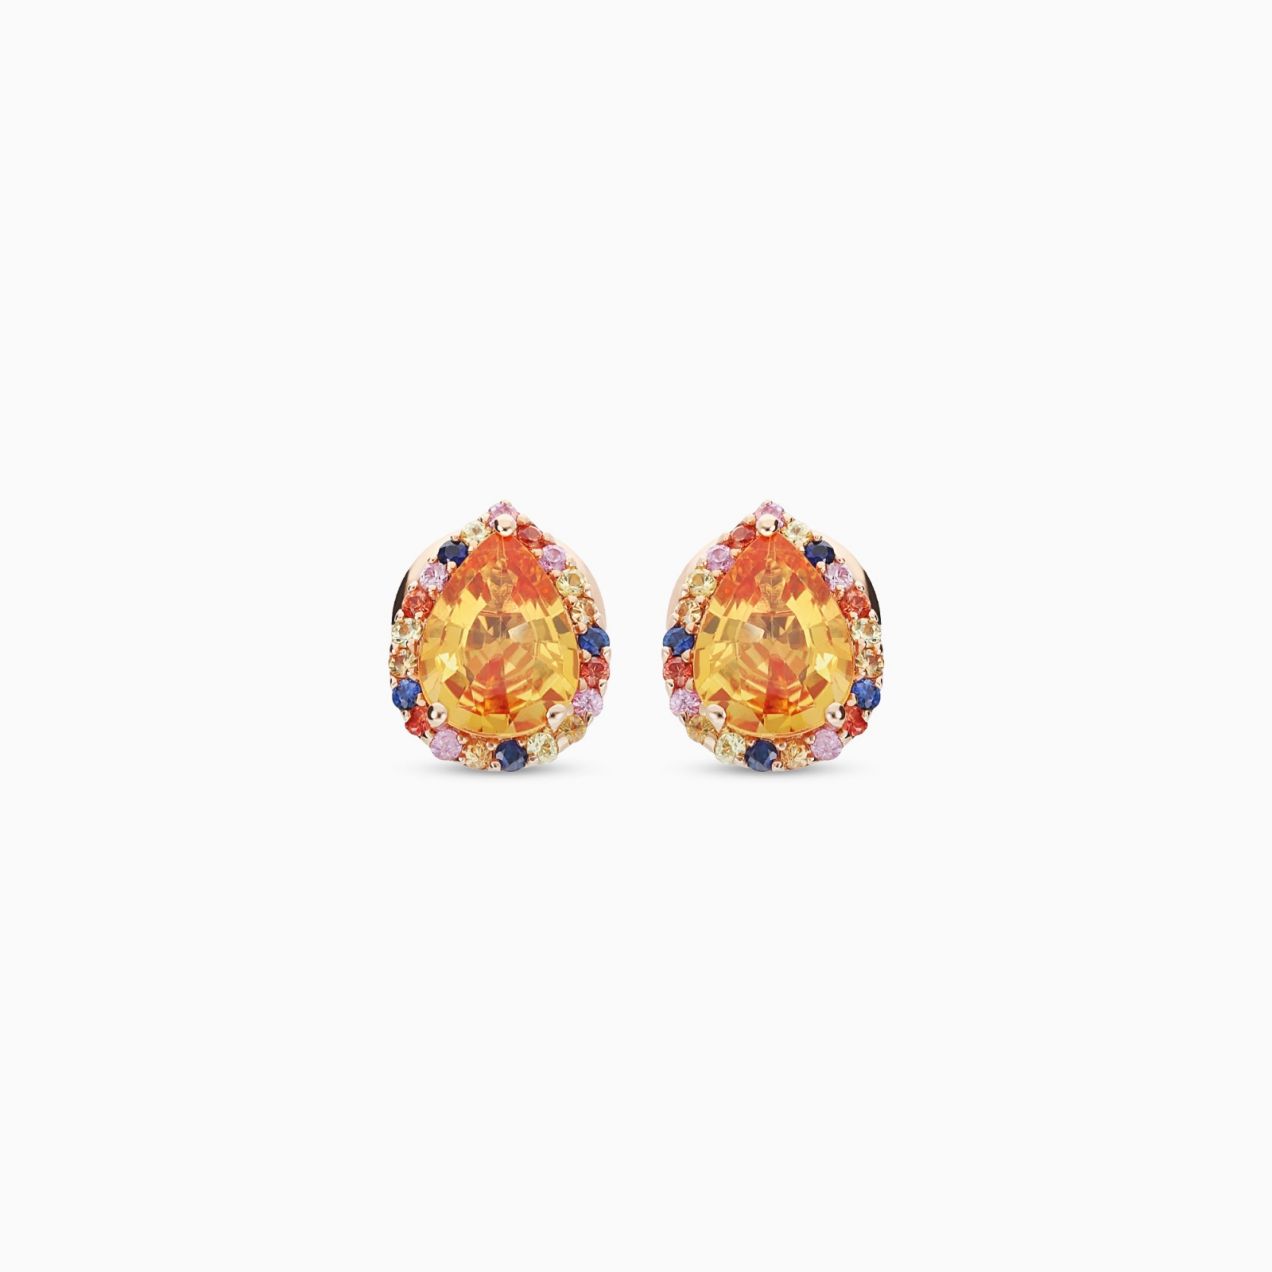 Rose gold earrings with yellow sapphires and multicoloured sapphires